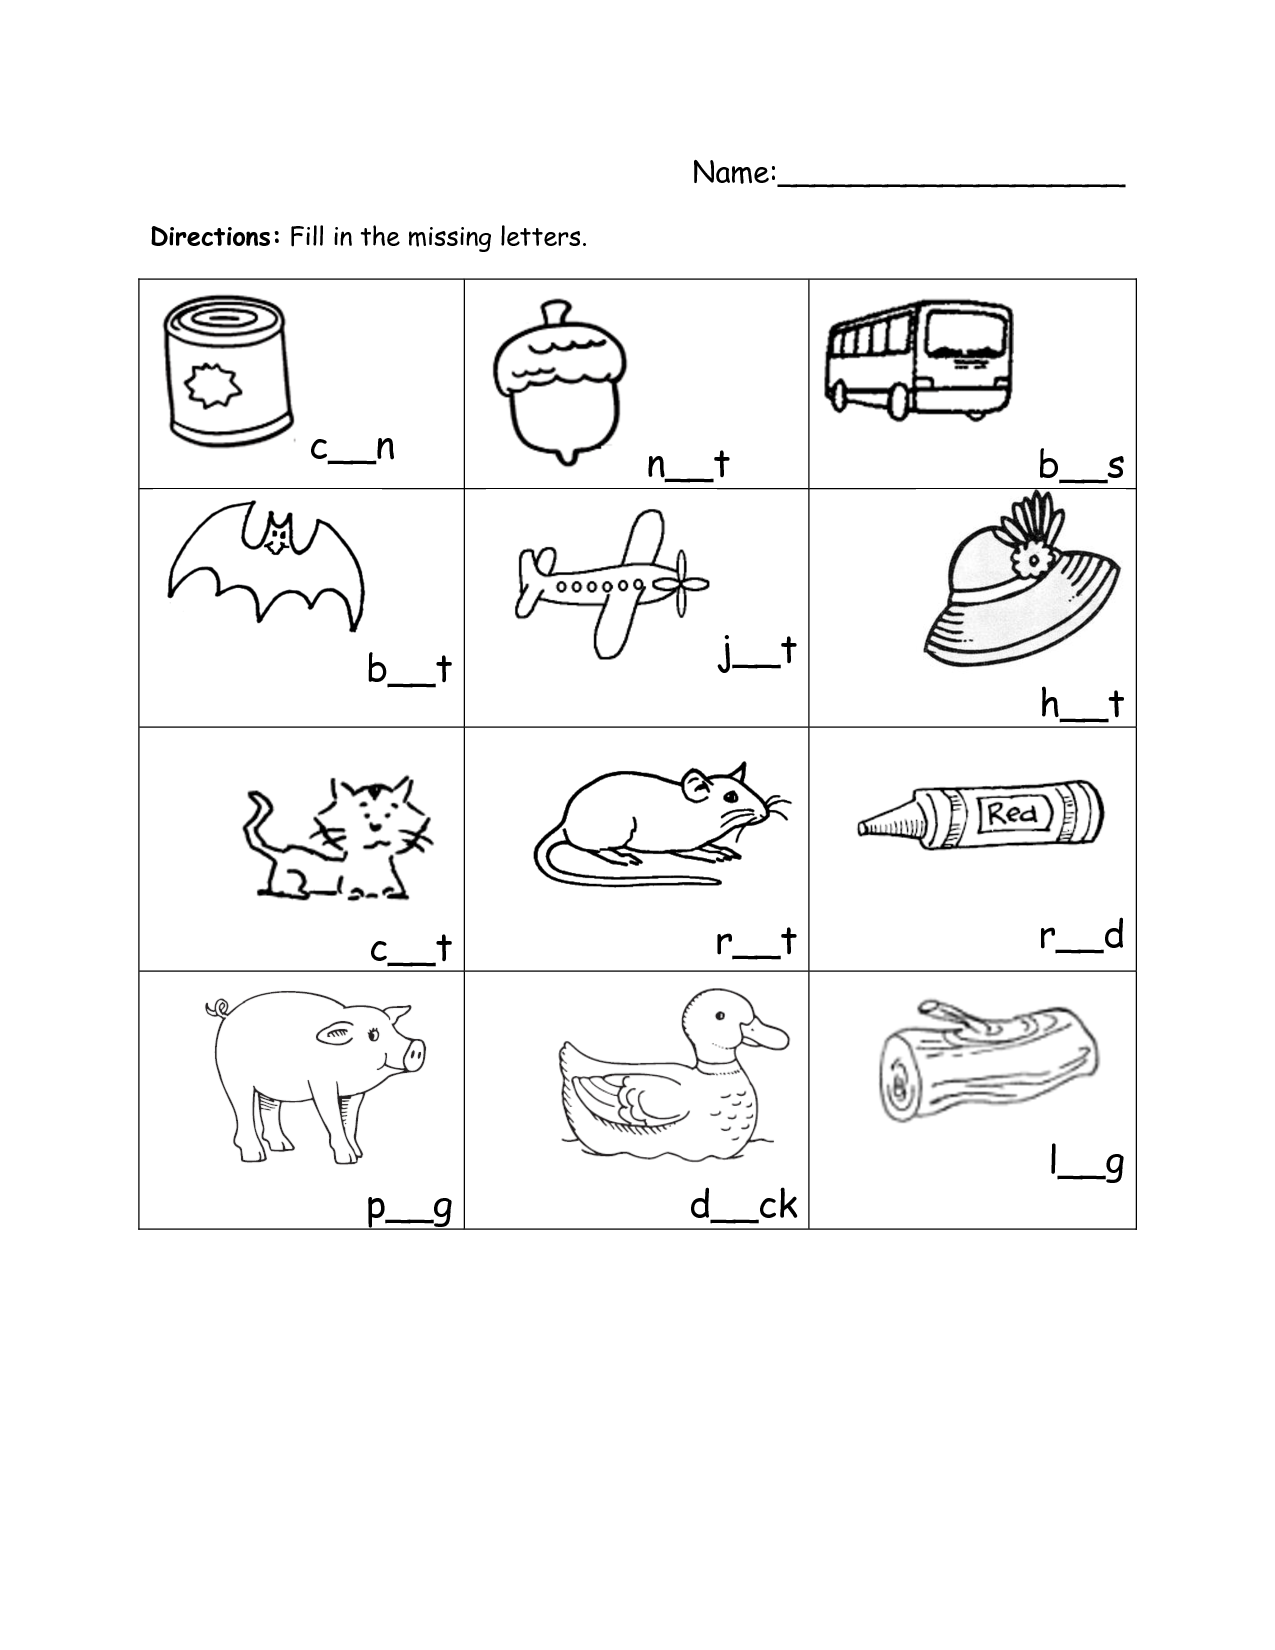 10 Best Images of Fill In Missing Letters Worksheets Alphabet - Free